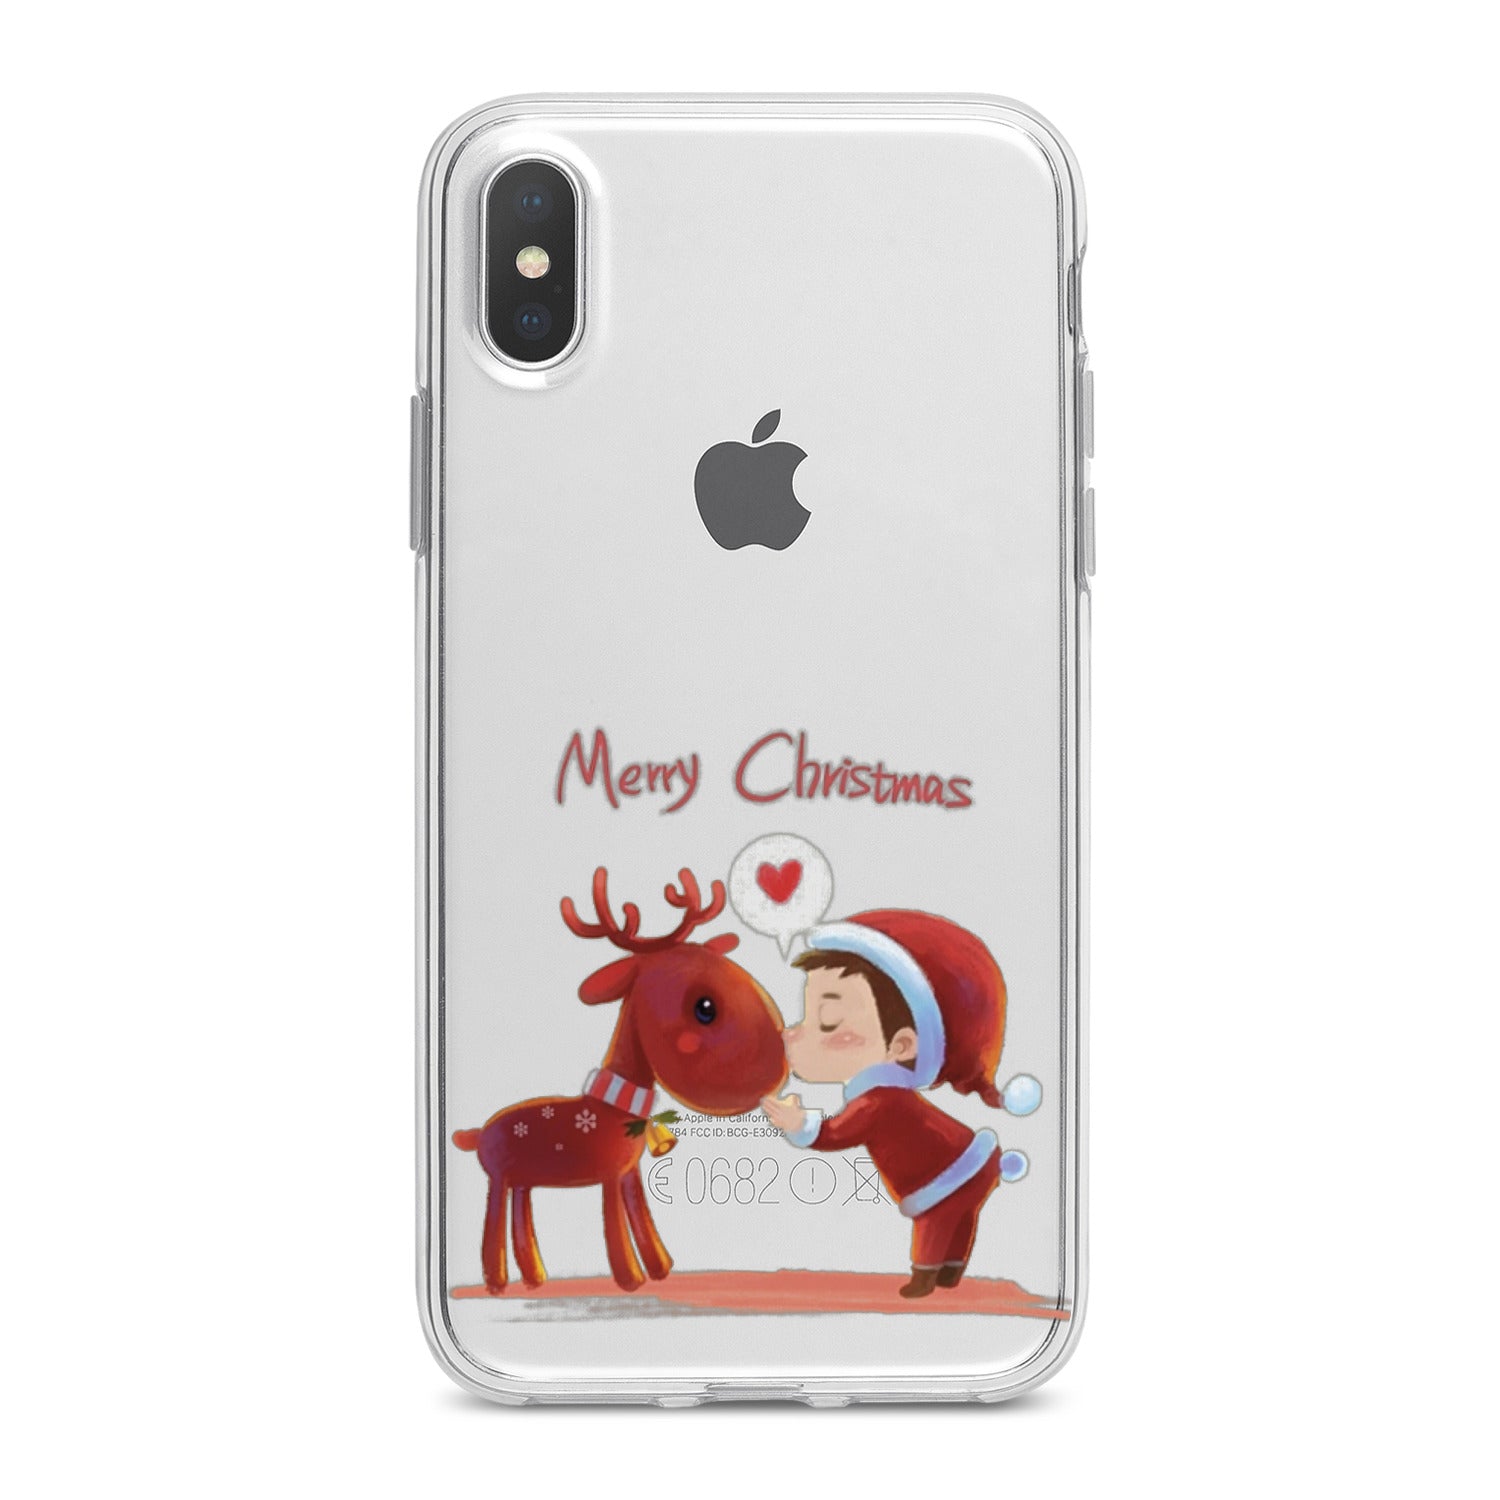 Lex Altern Christmas Deer Phone Case for your iPhone & Android phone.